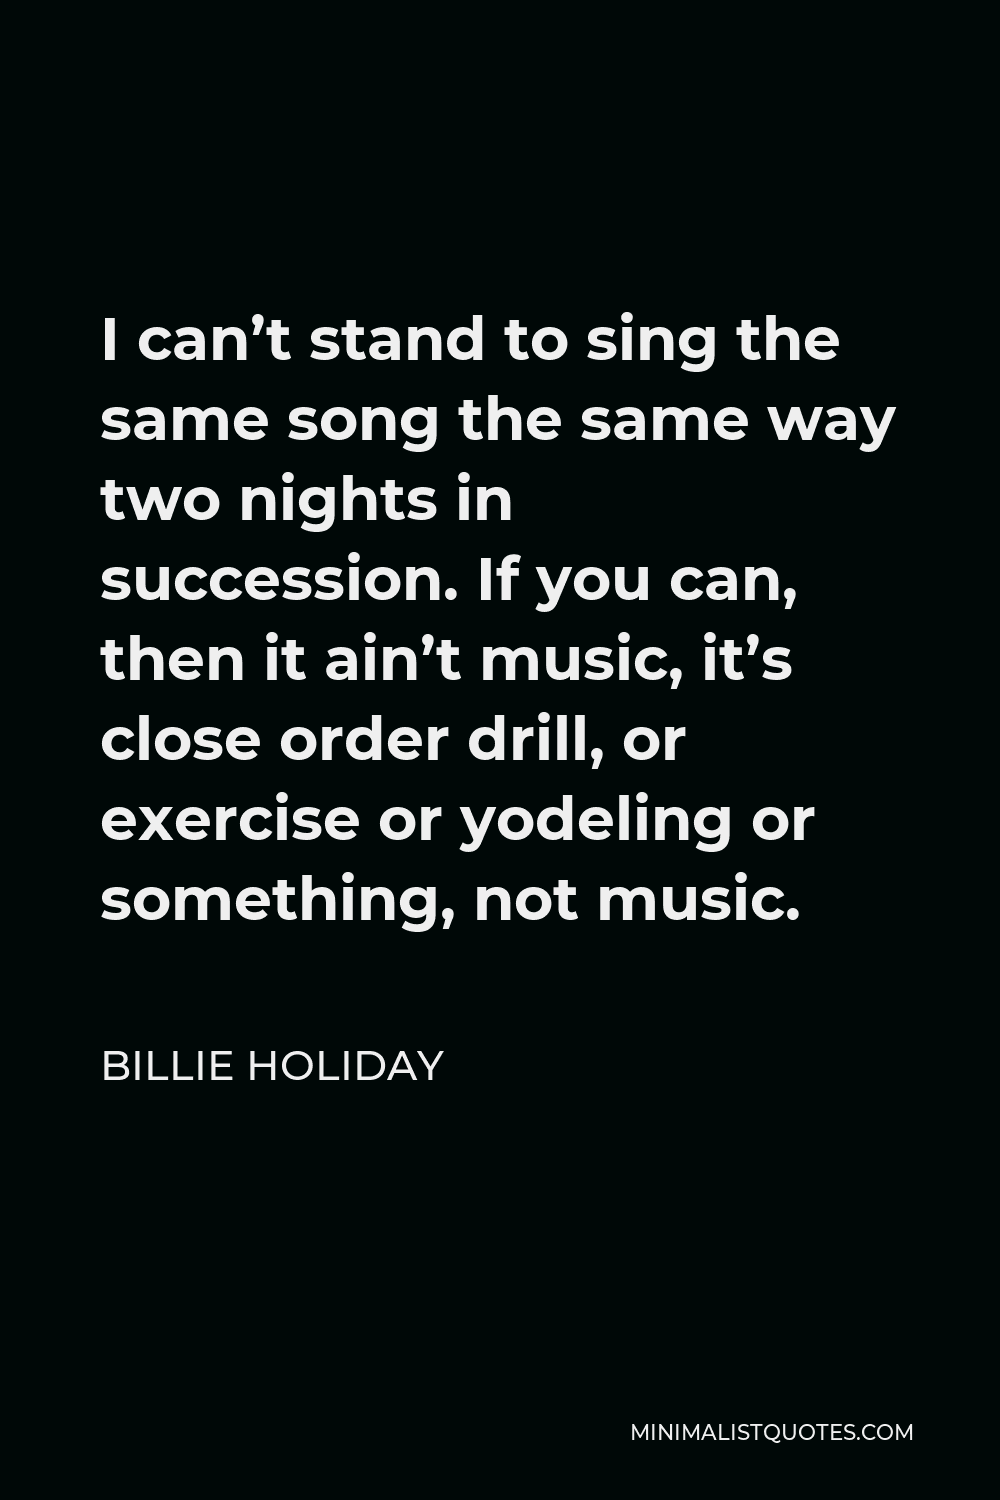 Billie Holiday Quote - I can’t stand to sing the same song the same way two nights in succession, let alone two years or ten years.